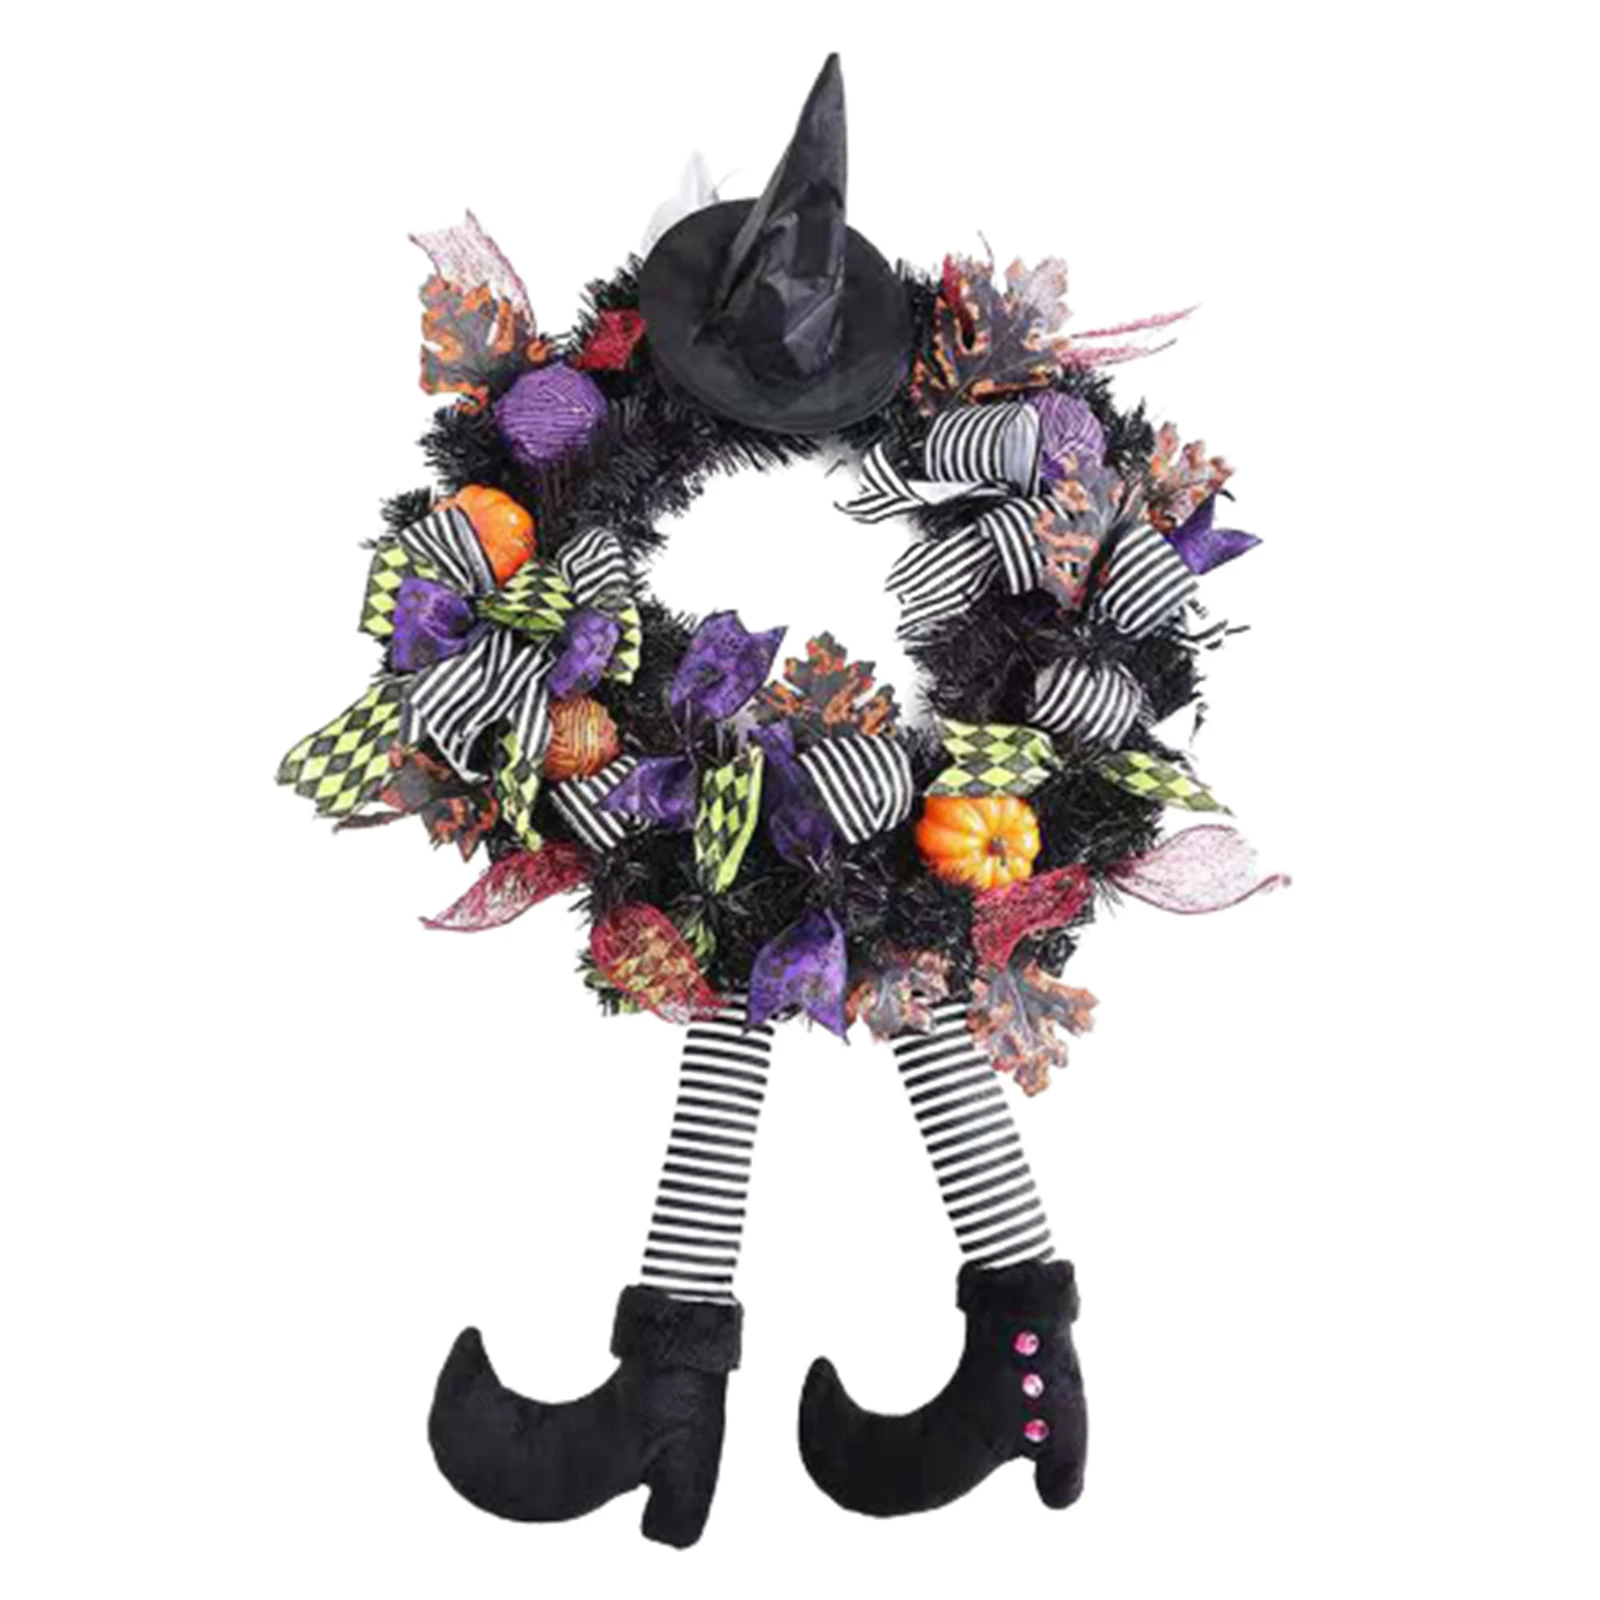 

Halloween Witches Wreaths for Front Door Witches Haunted House Decoration with Legs & Hat Decor for Halloween Festival Party